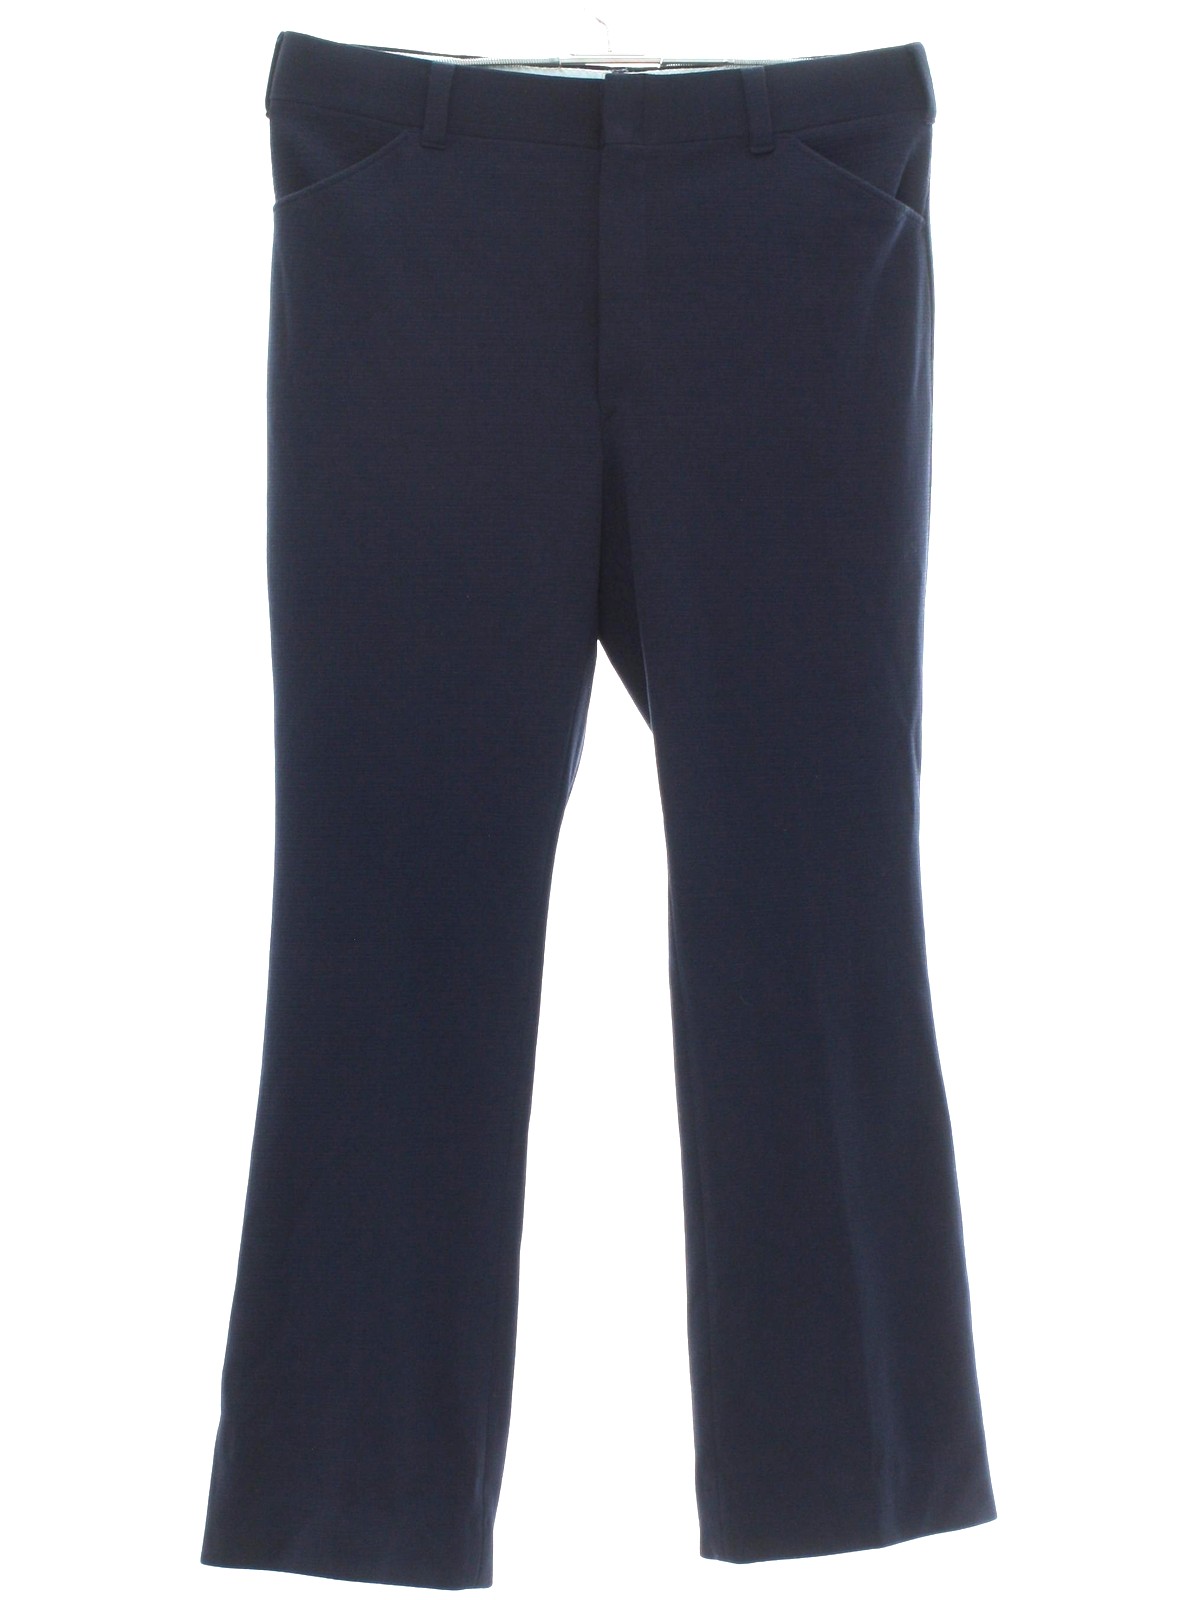 Retro 70's Flared Pants / Flares: 70s -JC Penney- Mens midnight blue ...